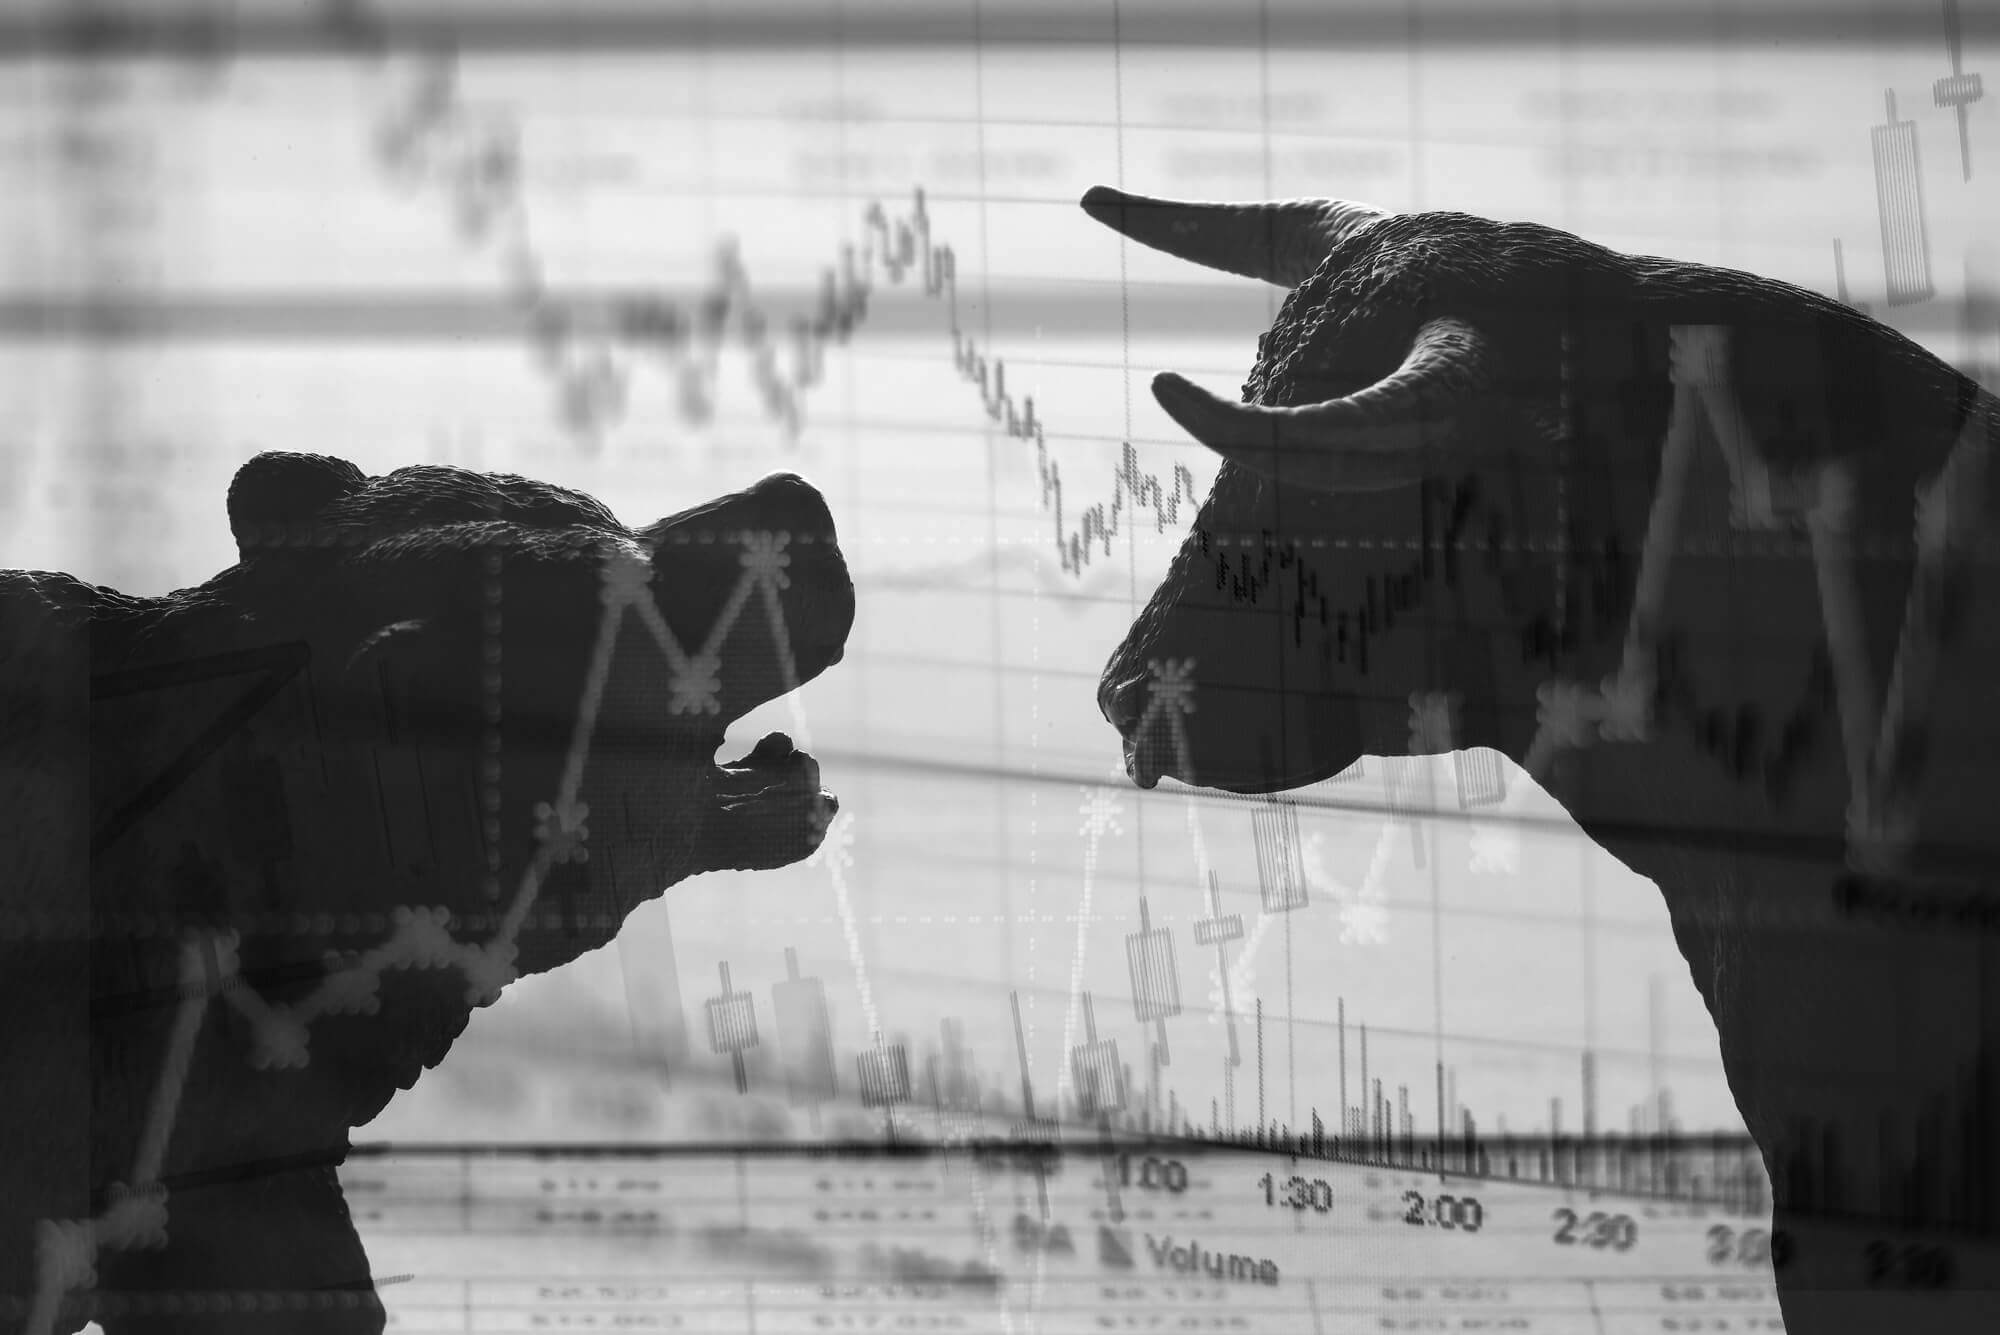 FINANCE: The Exchange - Technological Trends in the Stock Market